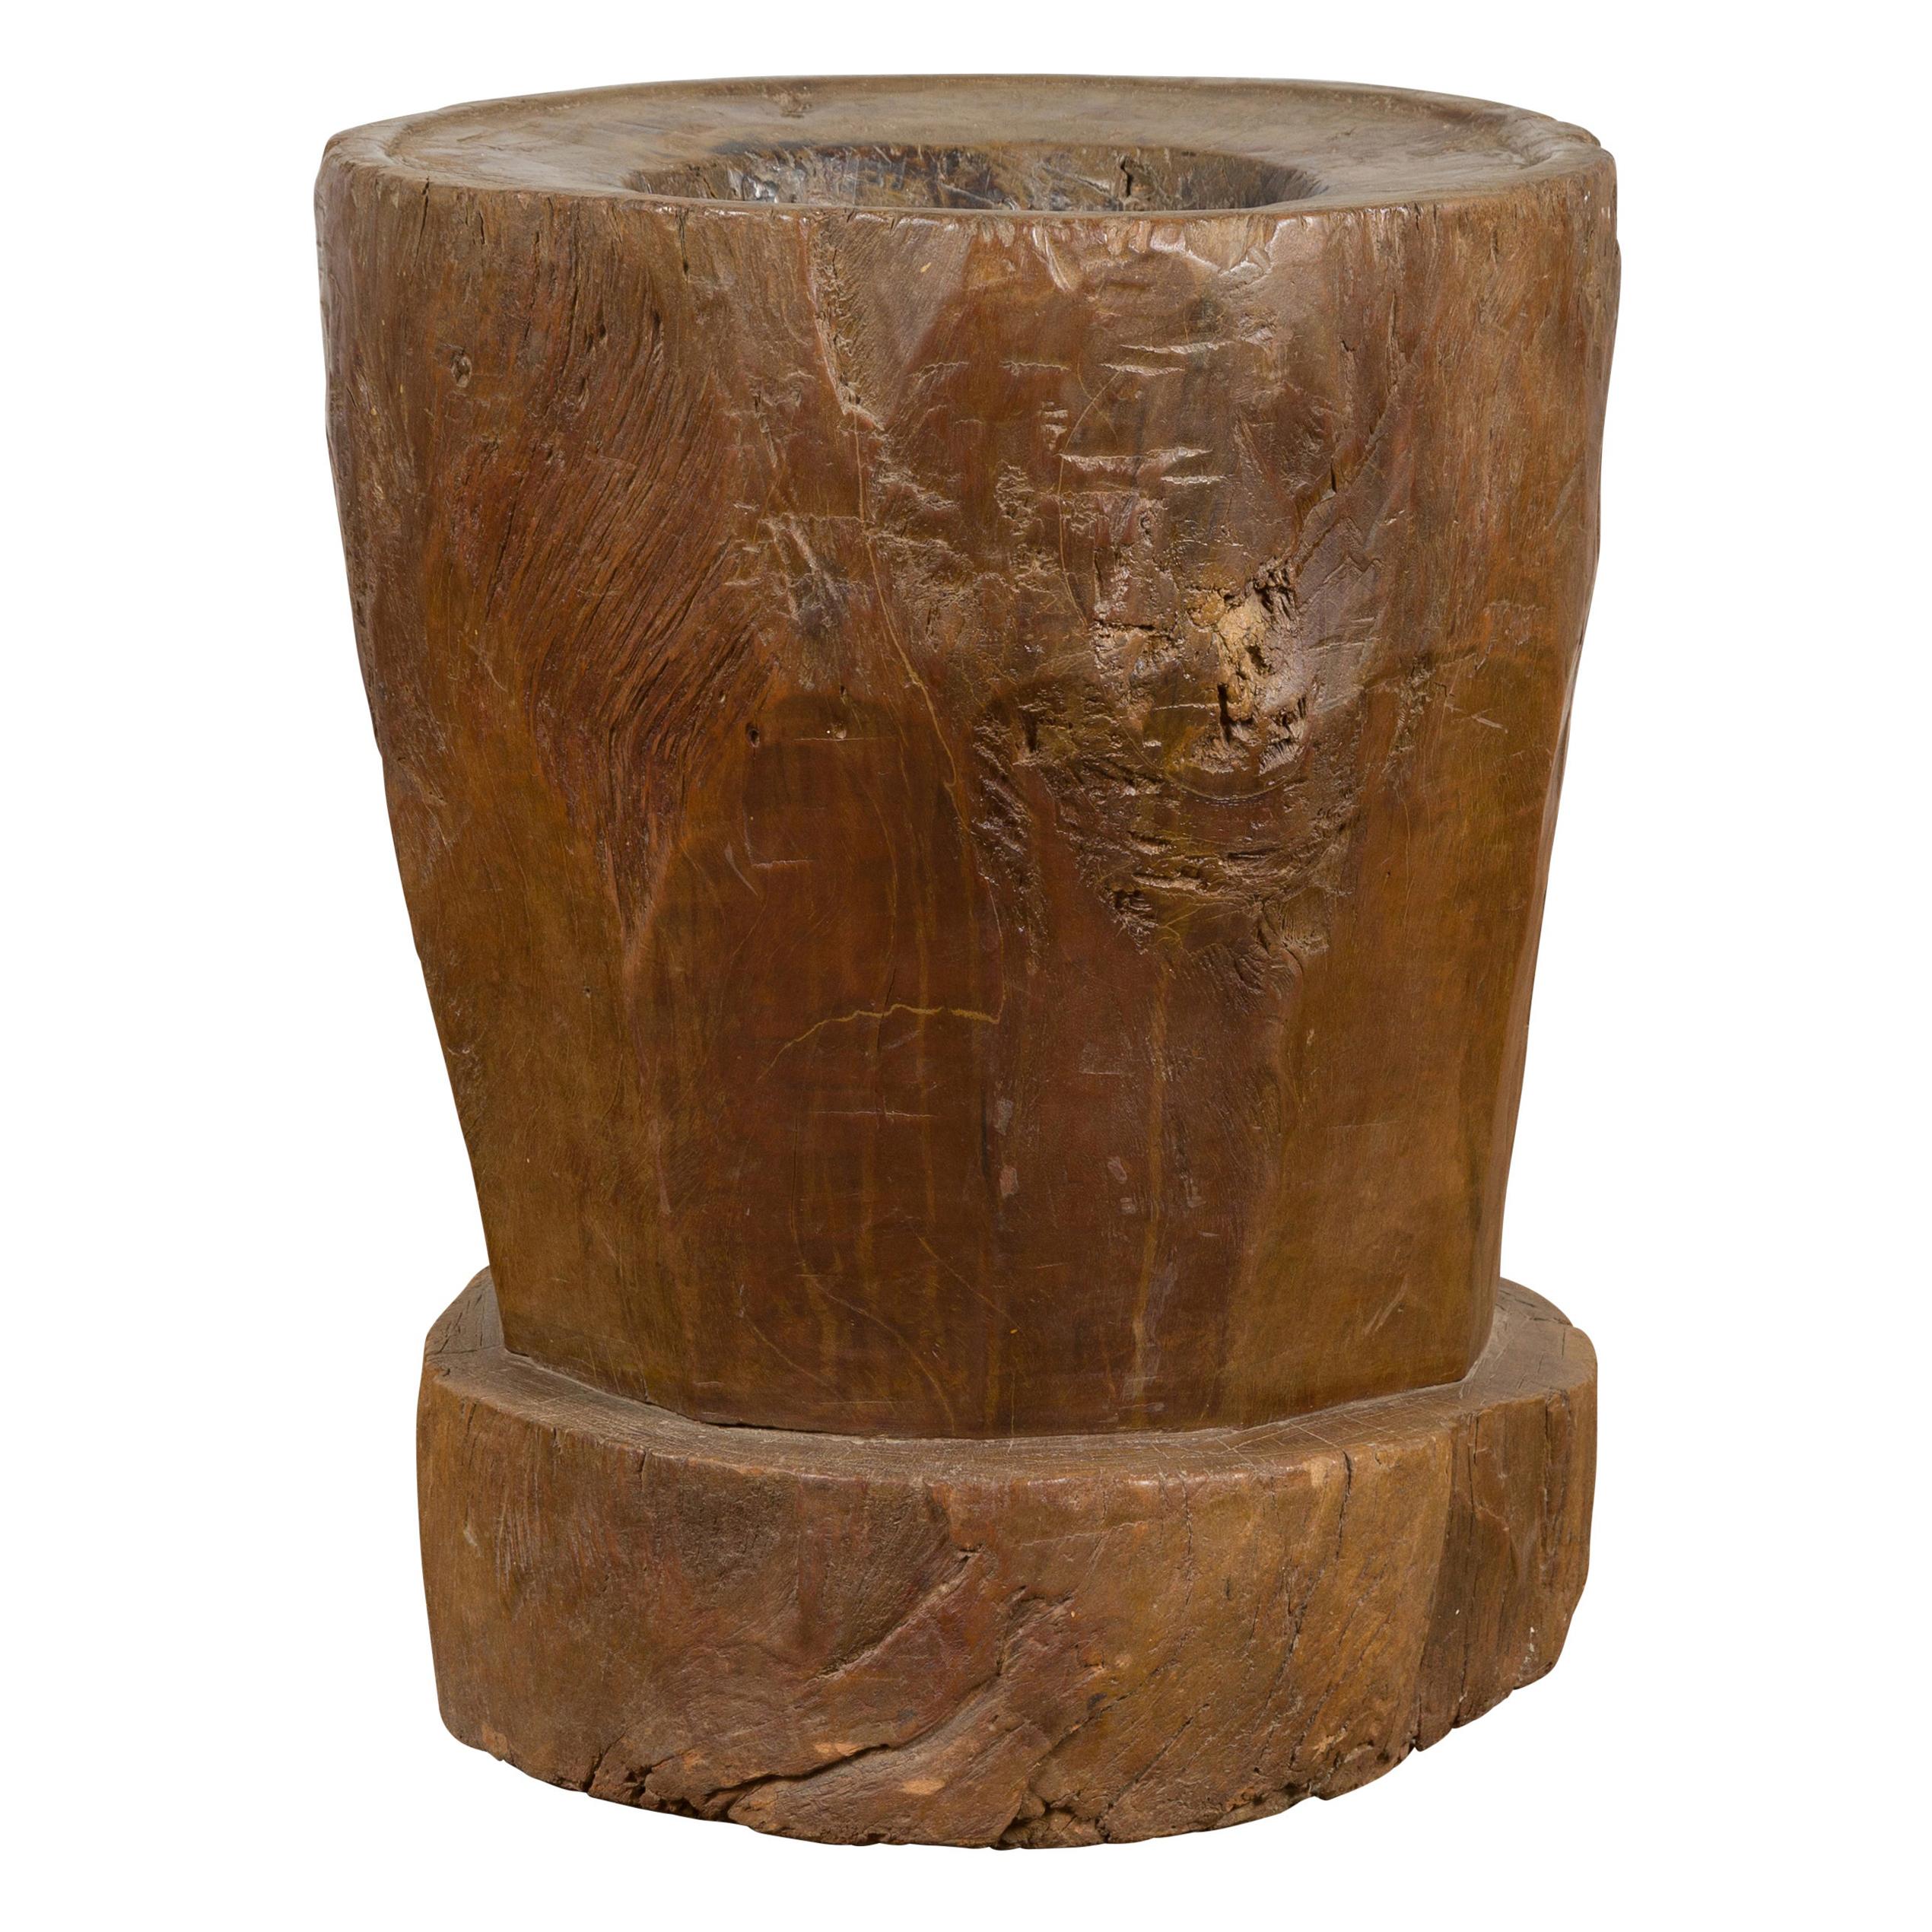 Antique Indonesian Rustic Tree Stump Planter with Weathered Appearance For Sale